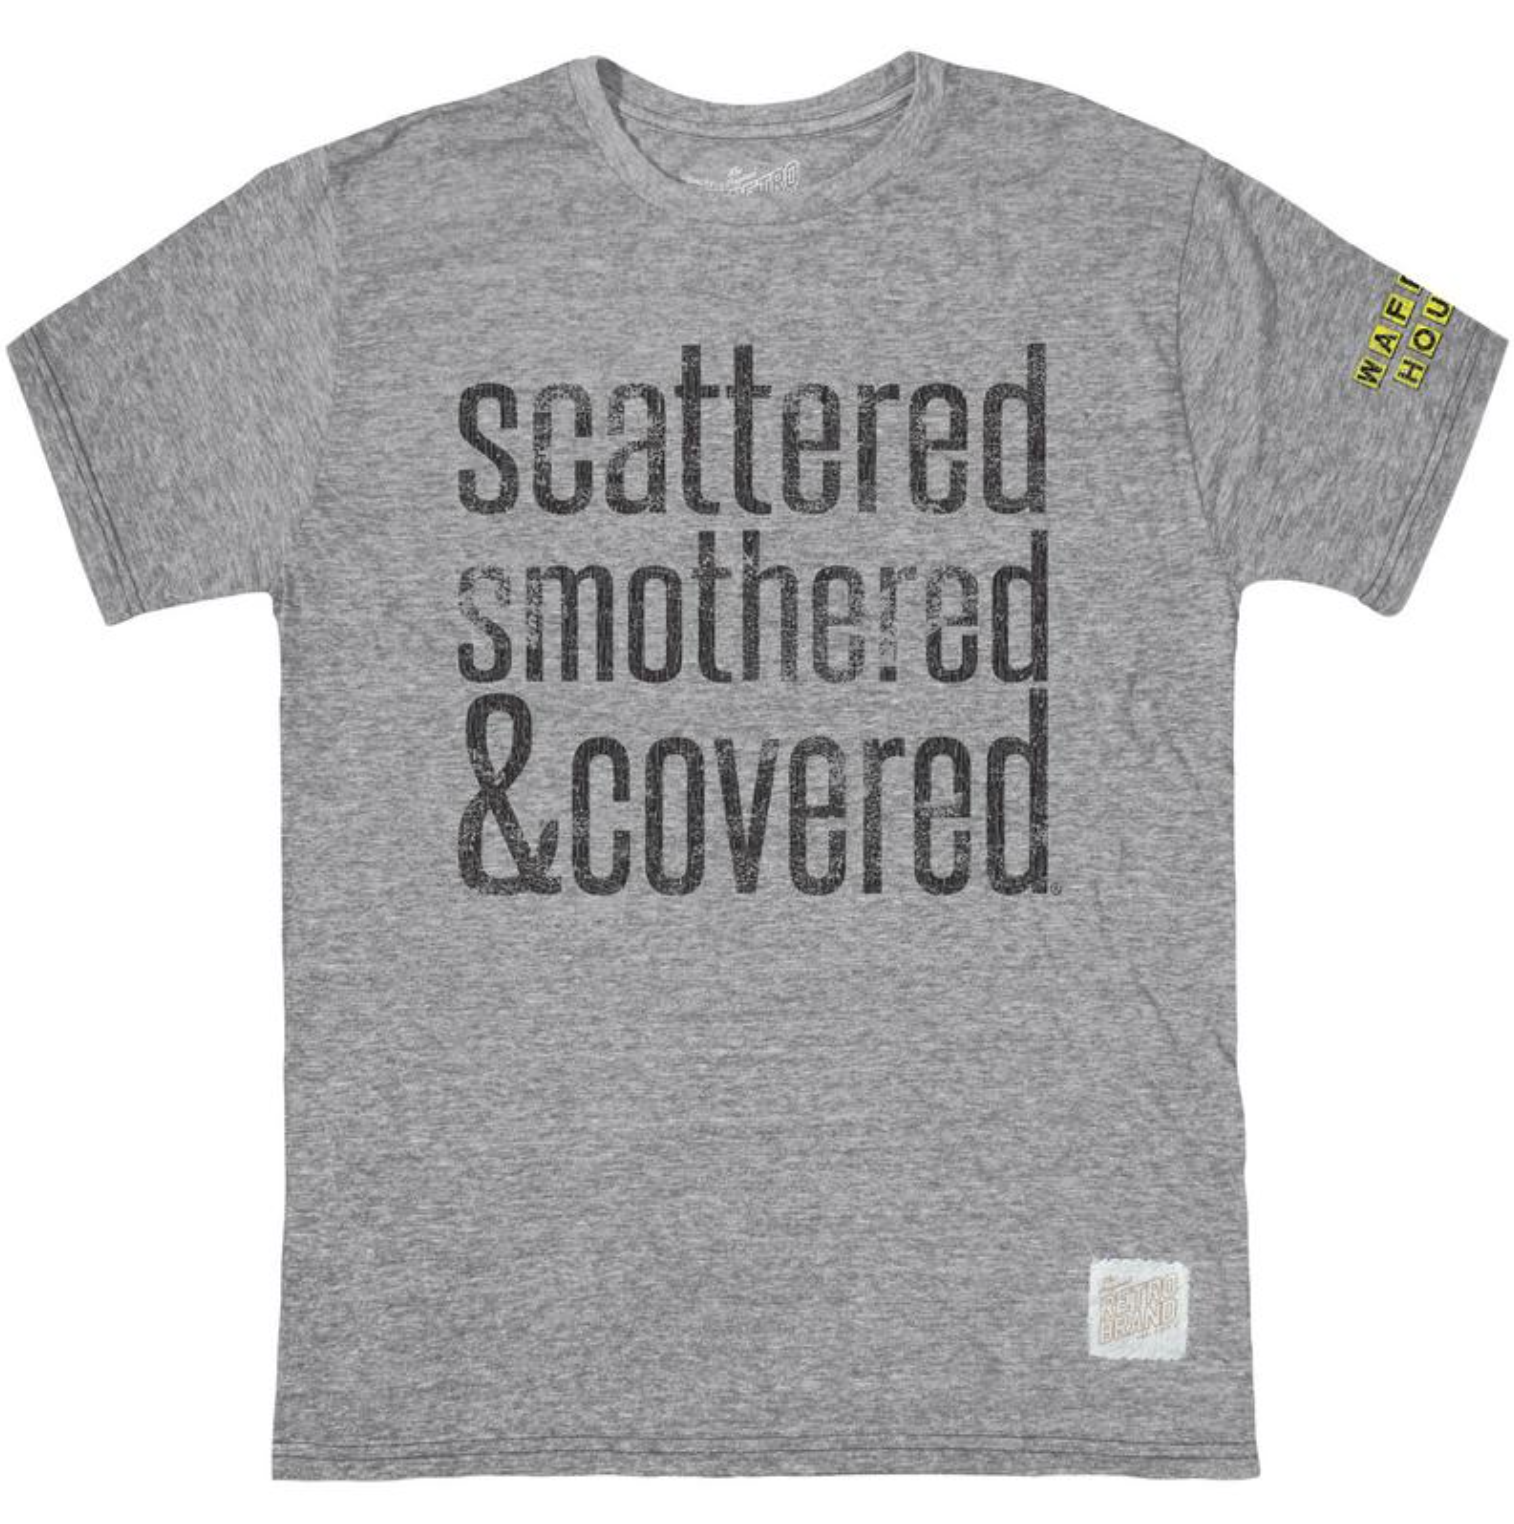 Waffle House "Scattered Smothered & Covered" Tri-Blend Tee